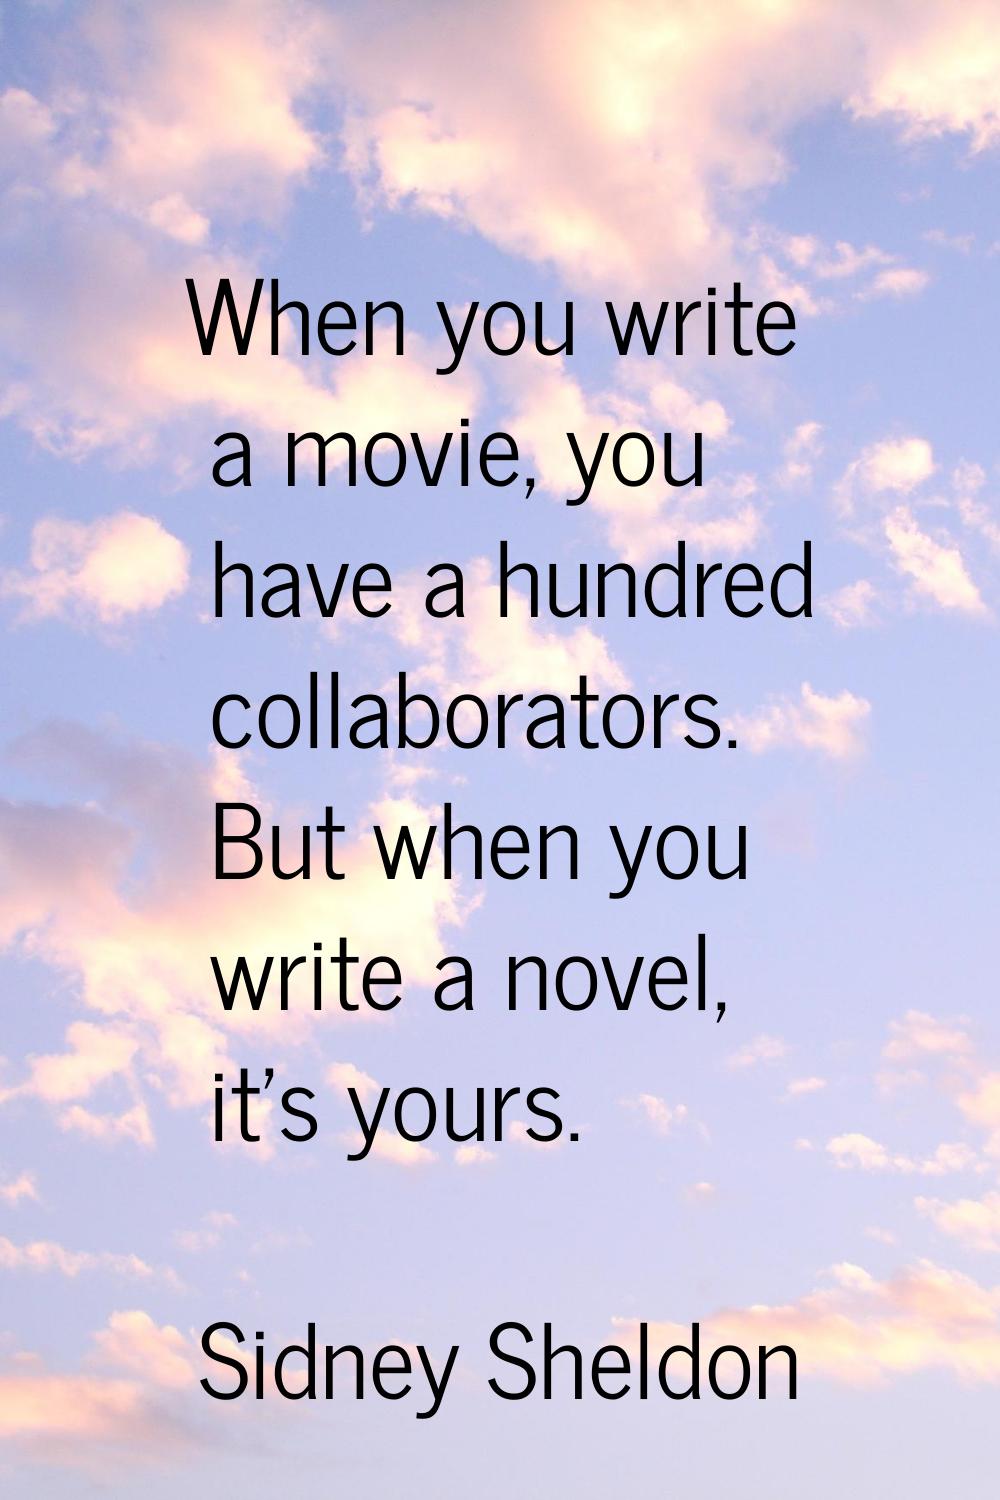 When you write a movie, you have a hundred collaborators. But when you write a novel, it's yours.